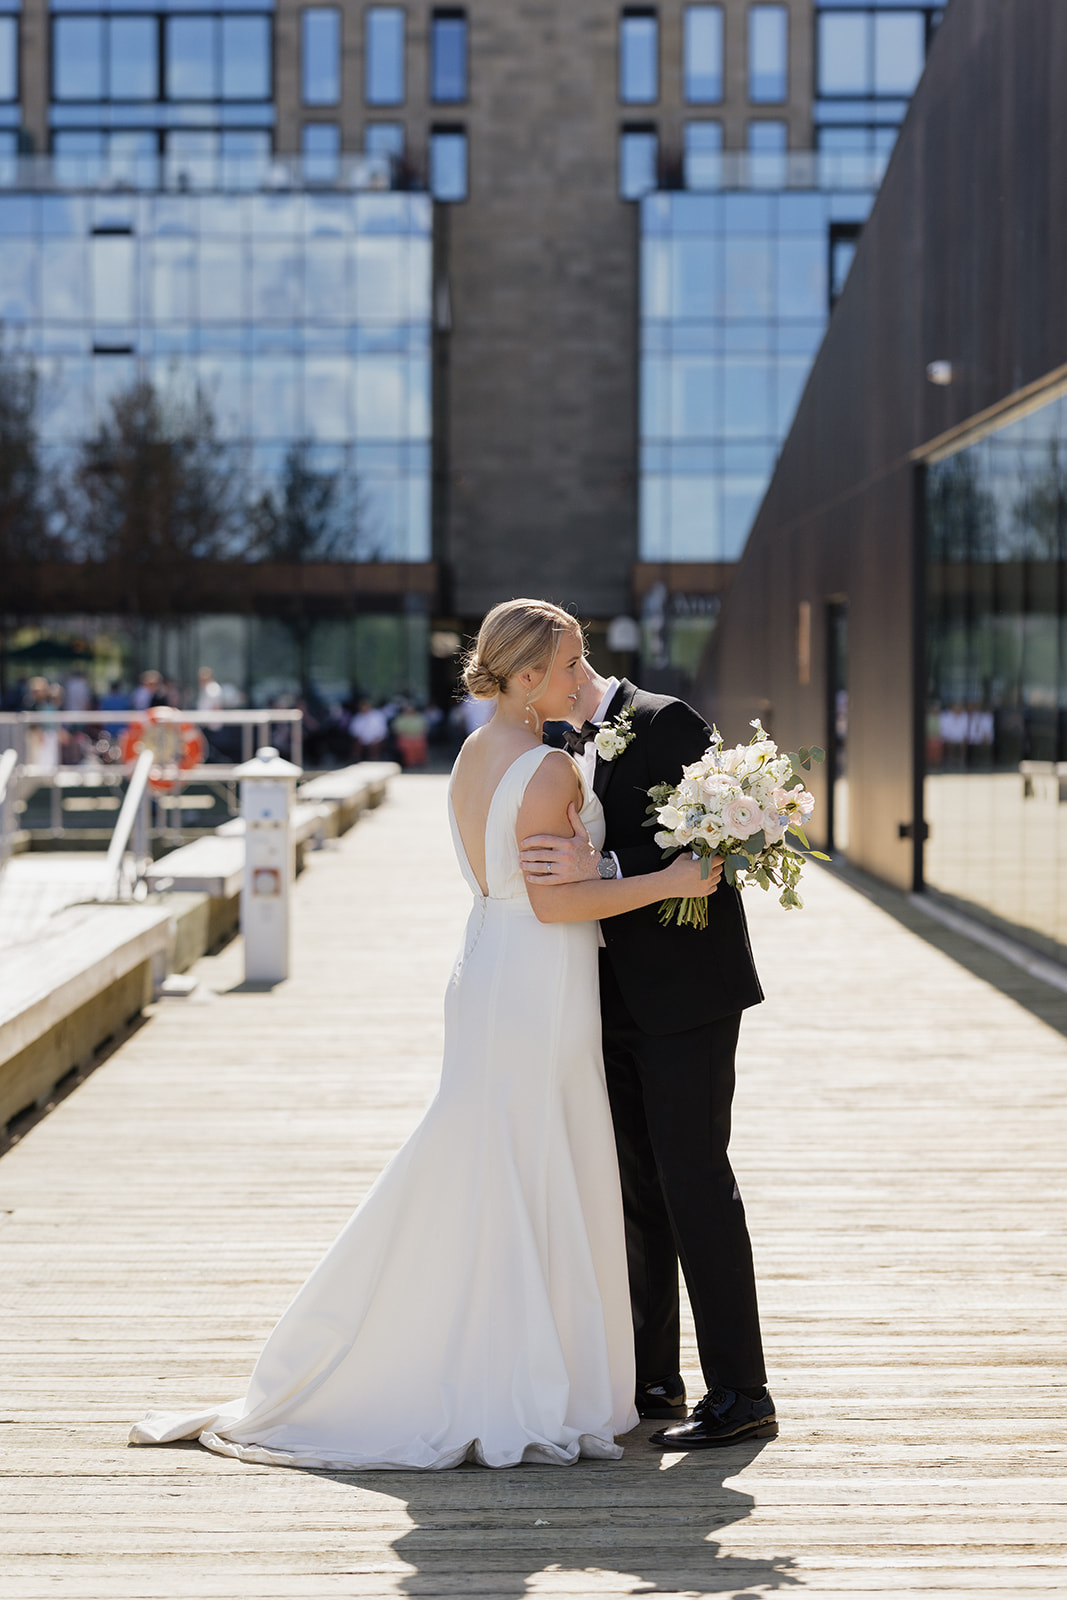 Halifax Wedding Photography at Pickford & Black; Wedding photographer based in Nova Scotia; Janelle Connor Photography